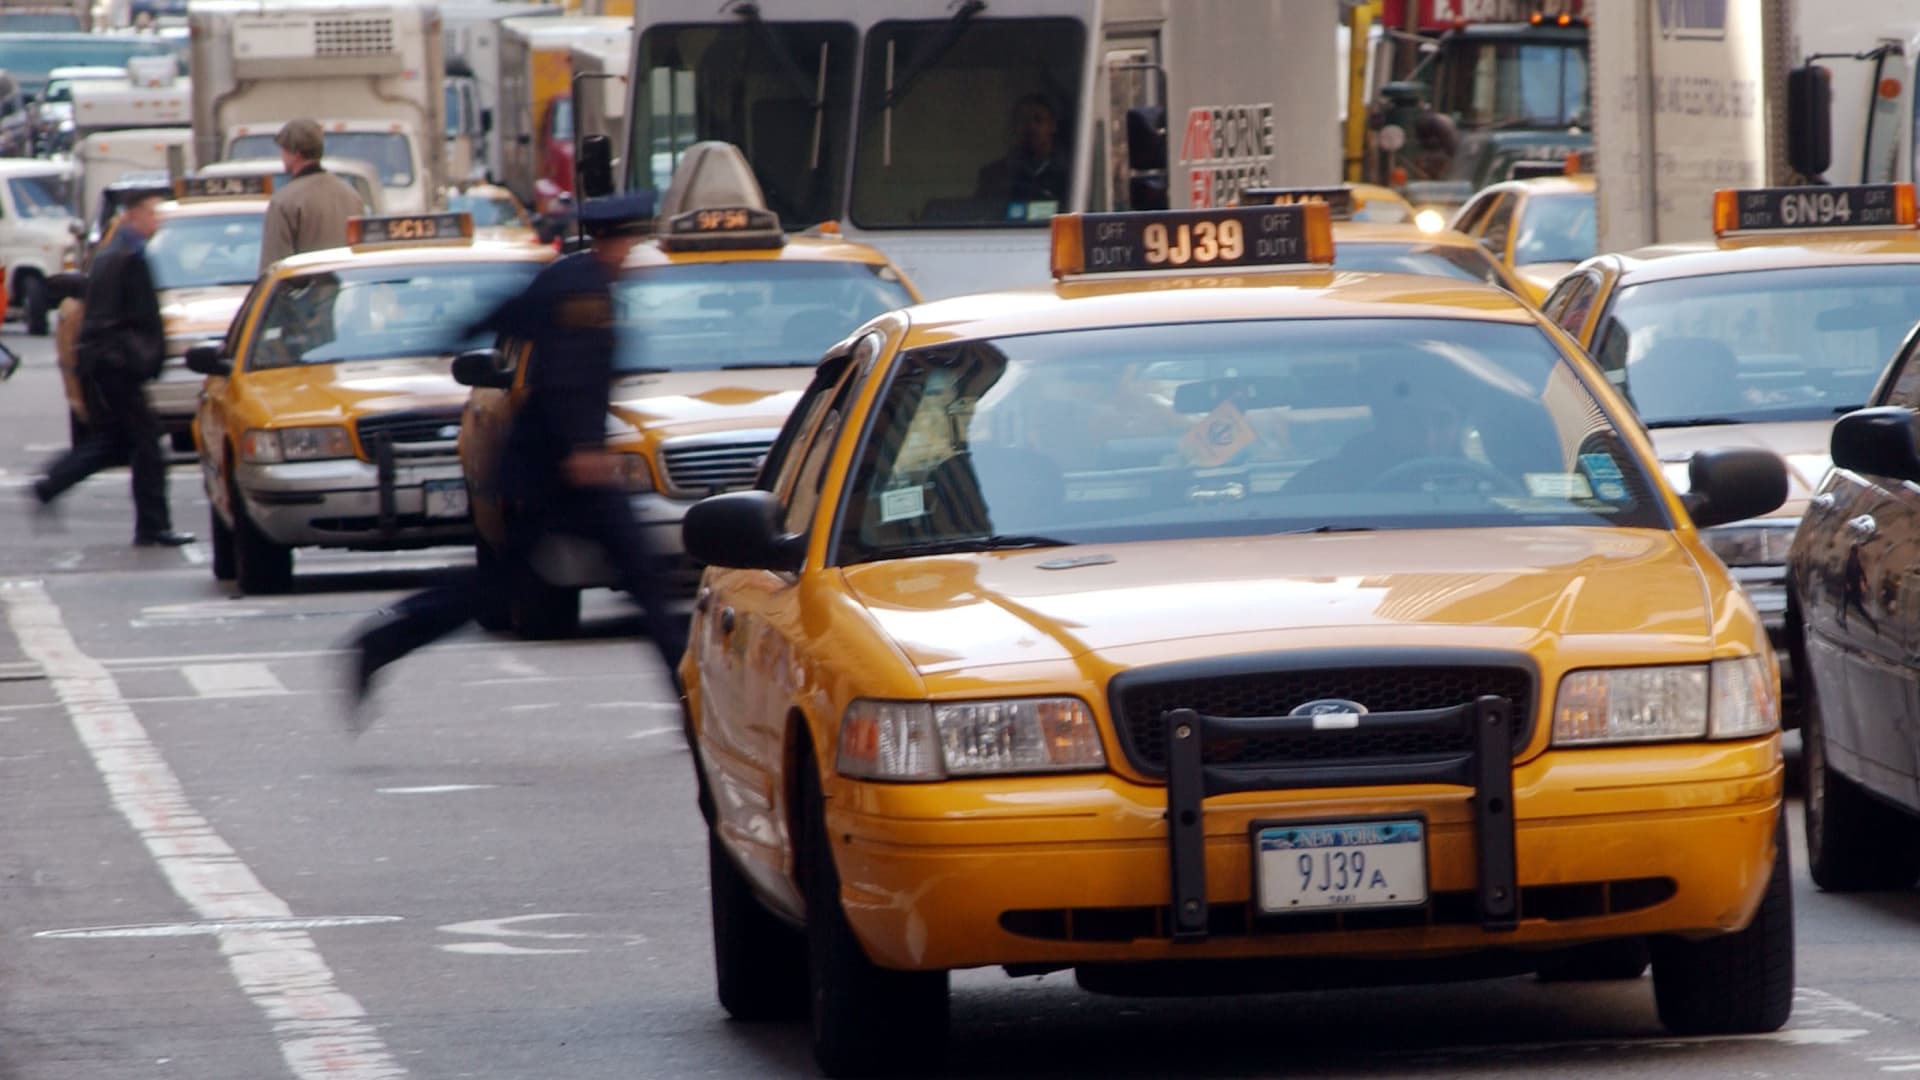 New York City taxis fight for survival against Uber and Lyft